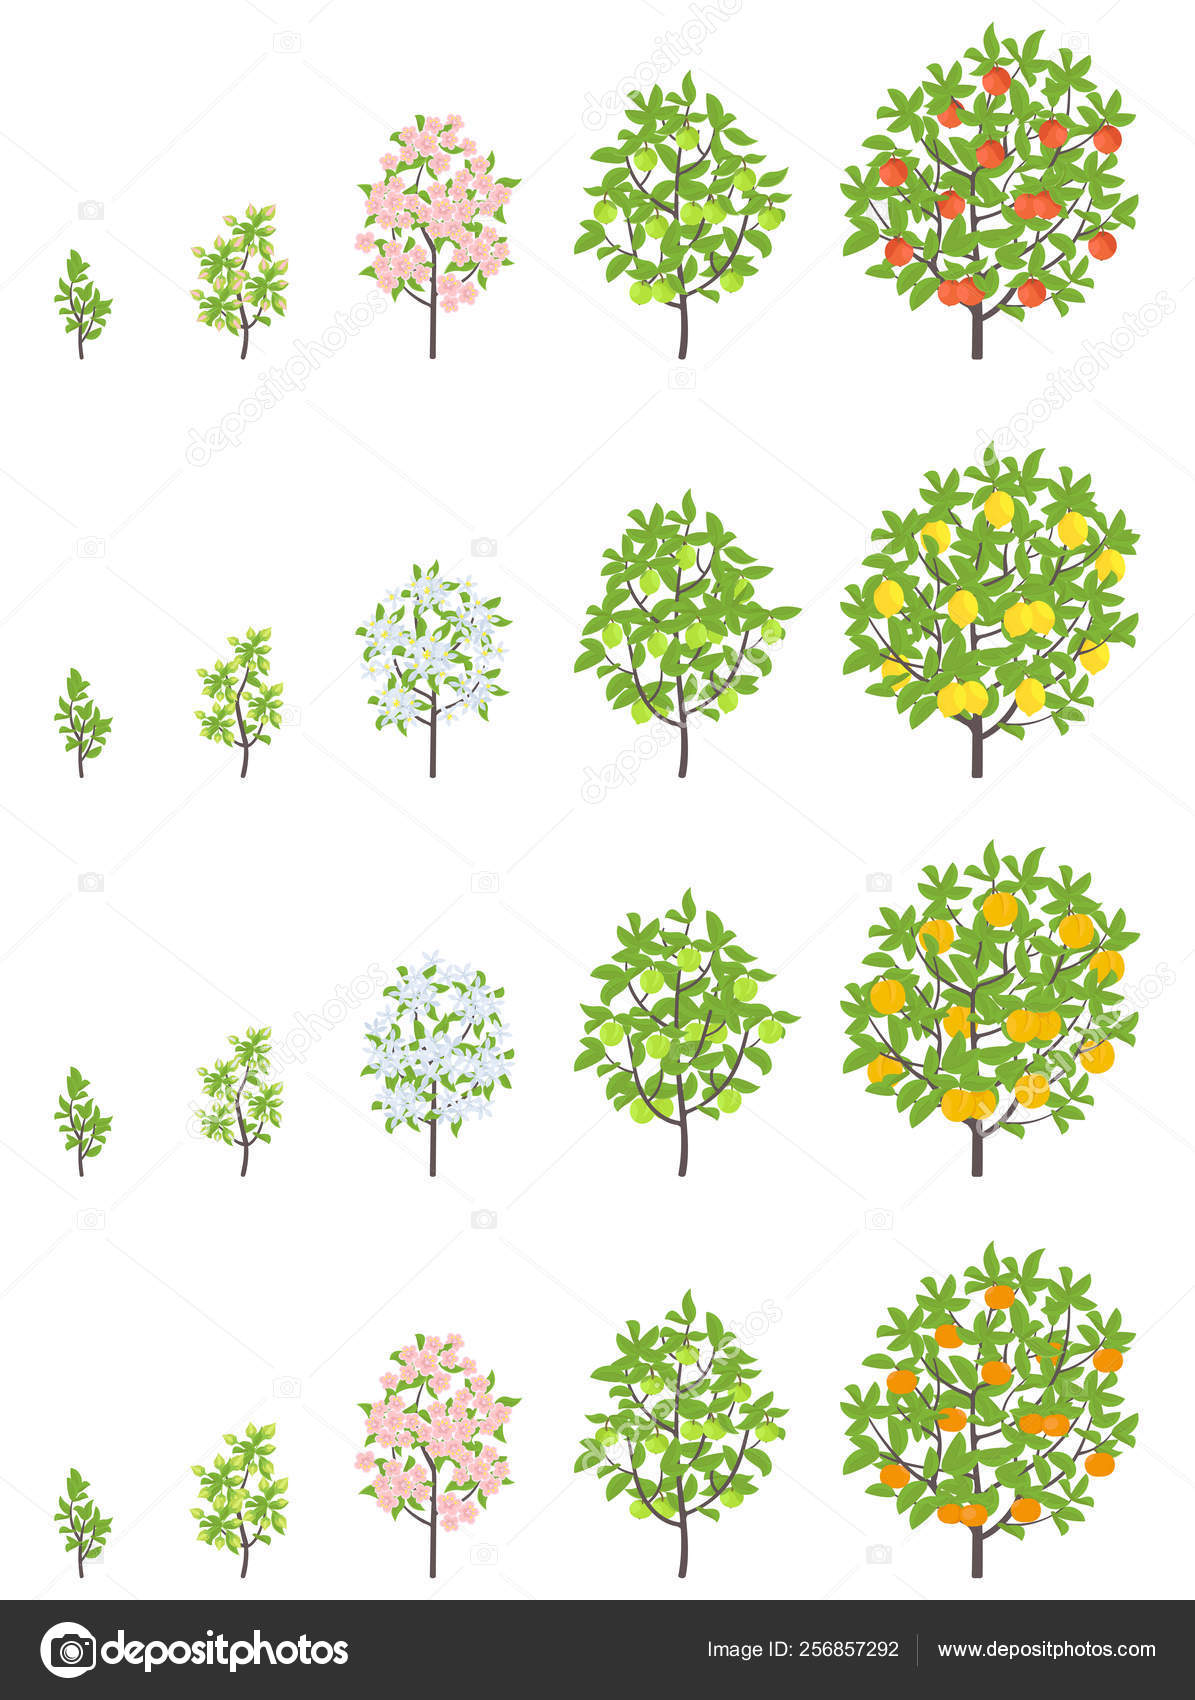 Fruit tree stages